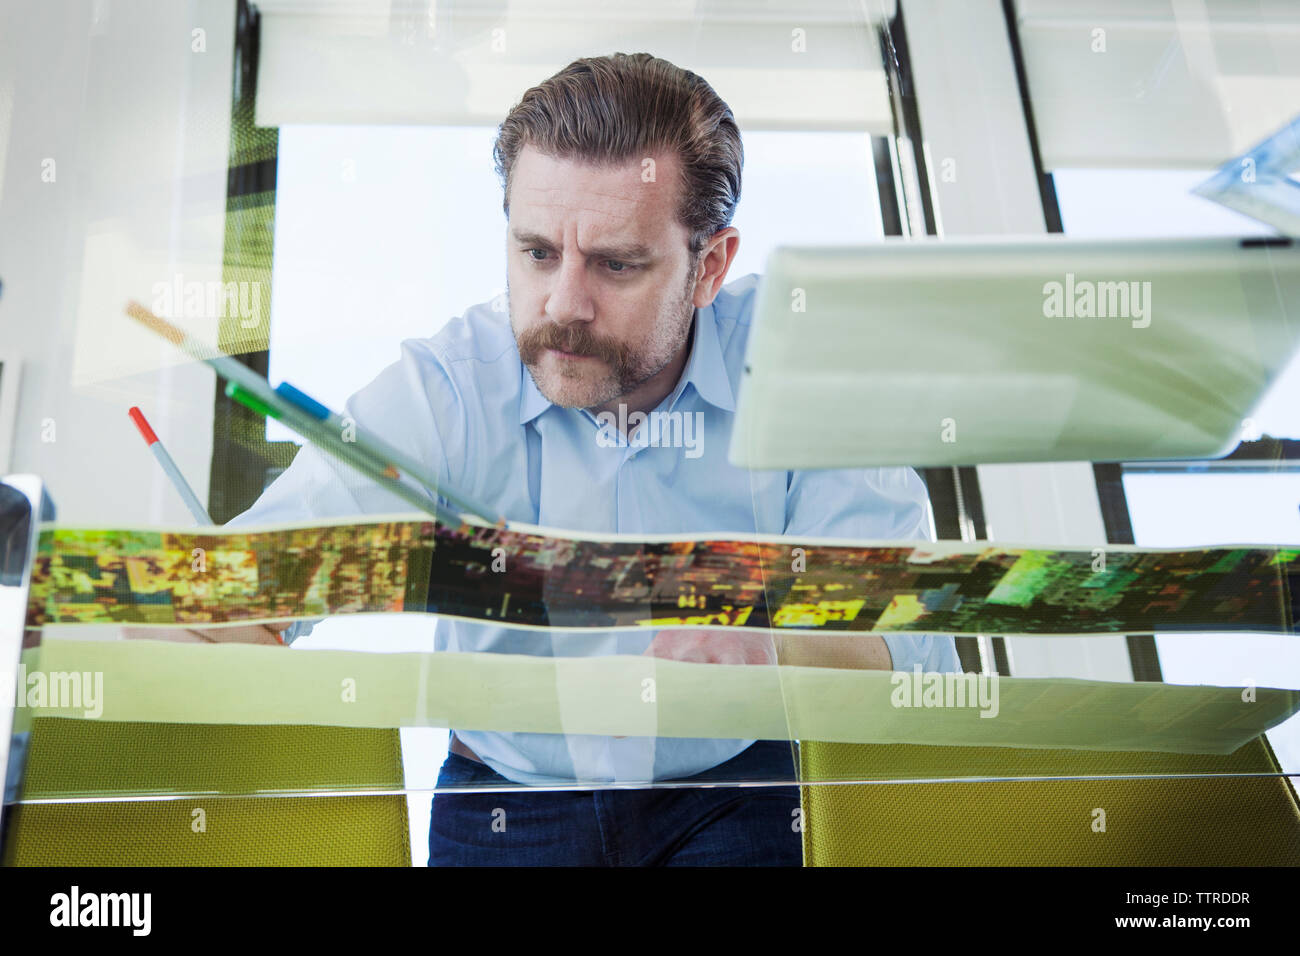 Low angle view of creative businessman analyzing photographs at glass conference table Stock Photo